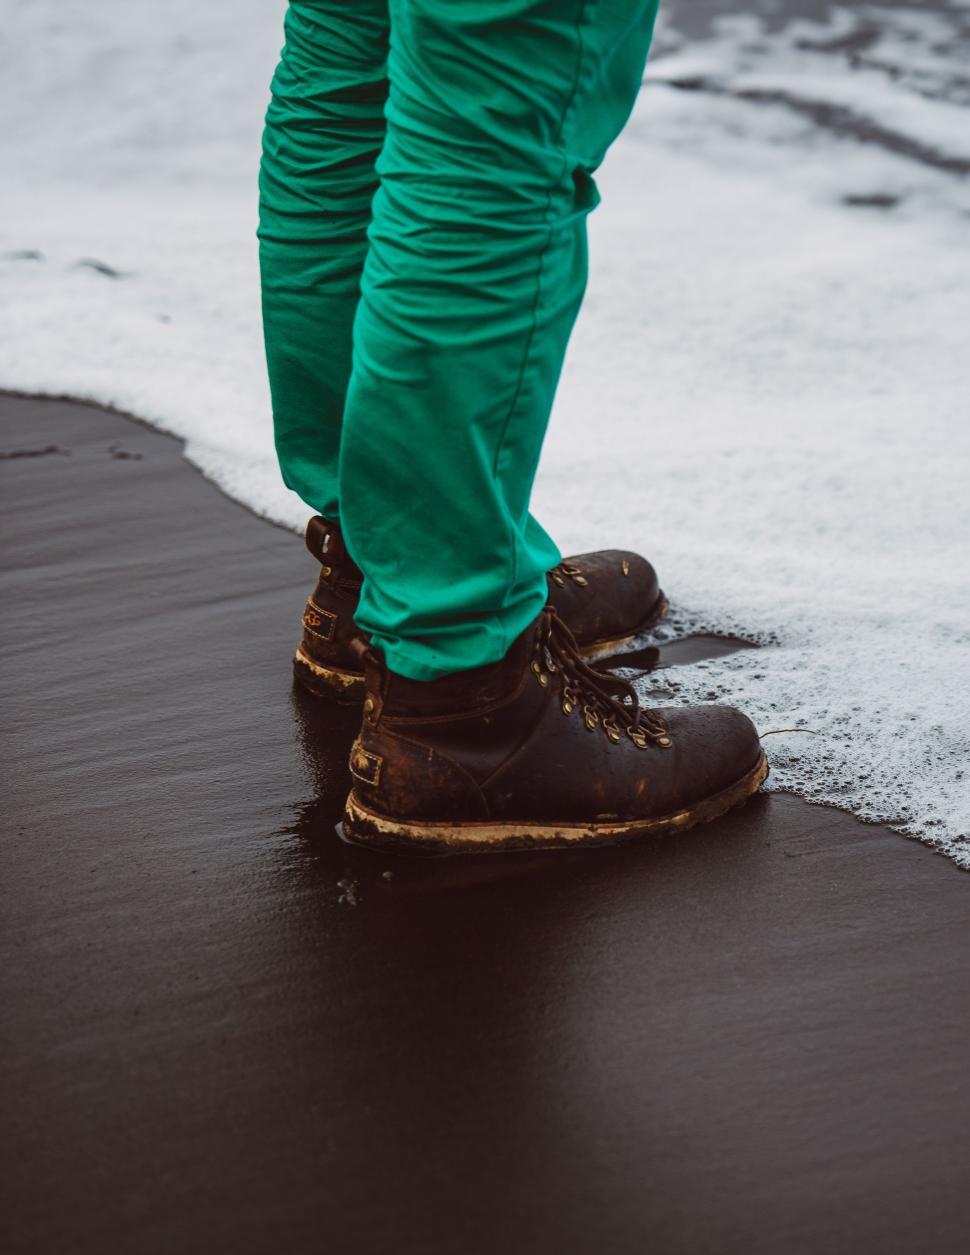 Free Image of Person in Green Pants Standing on Wet Surface 